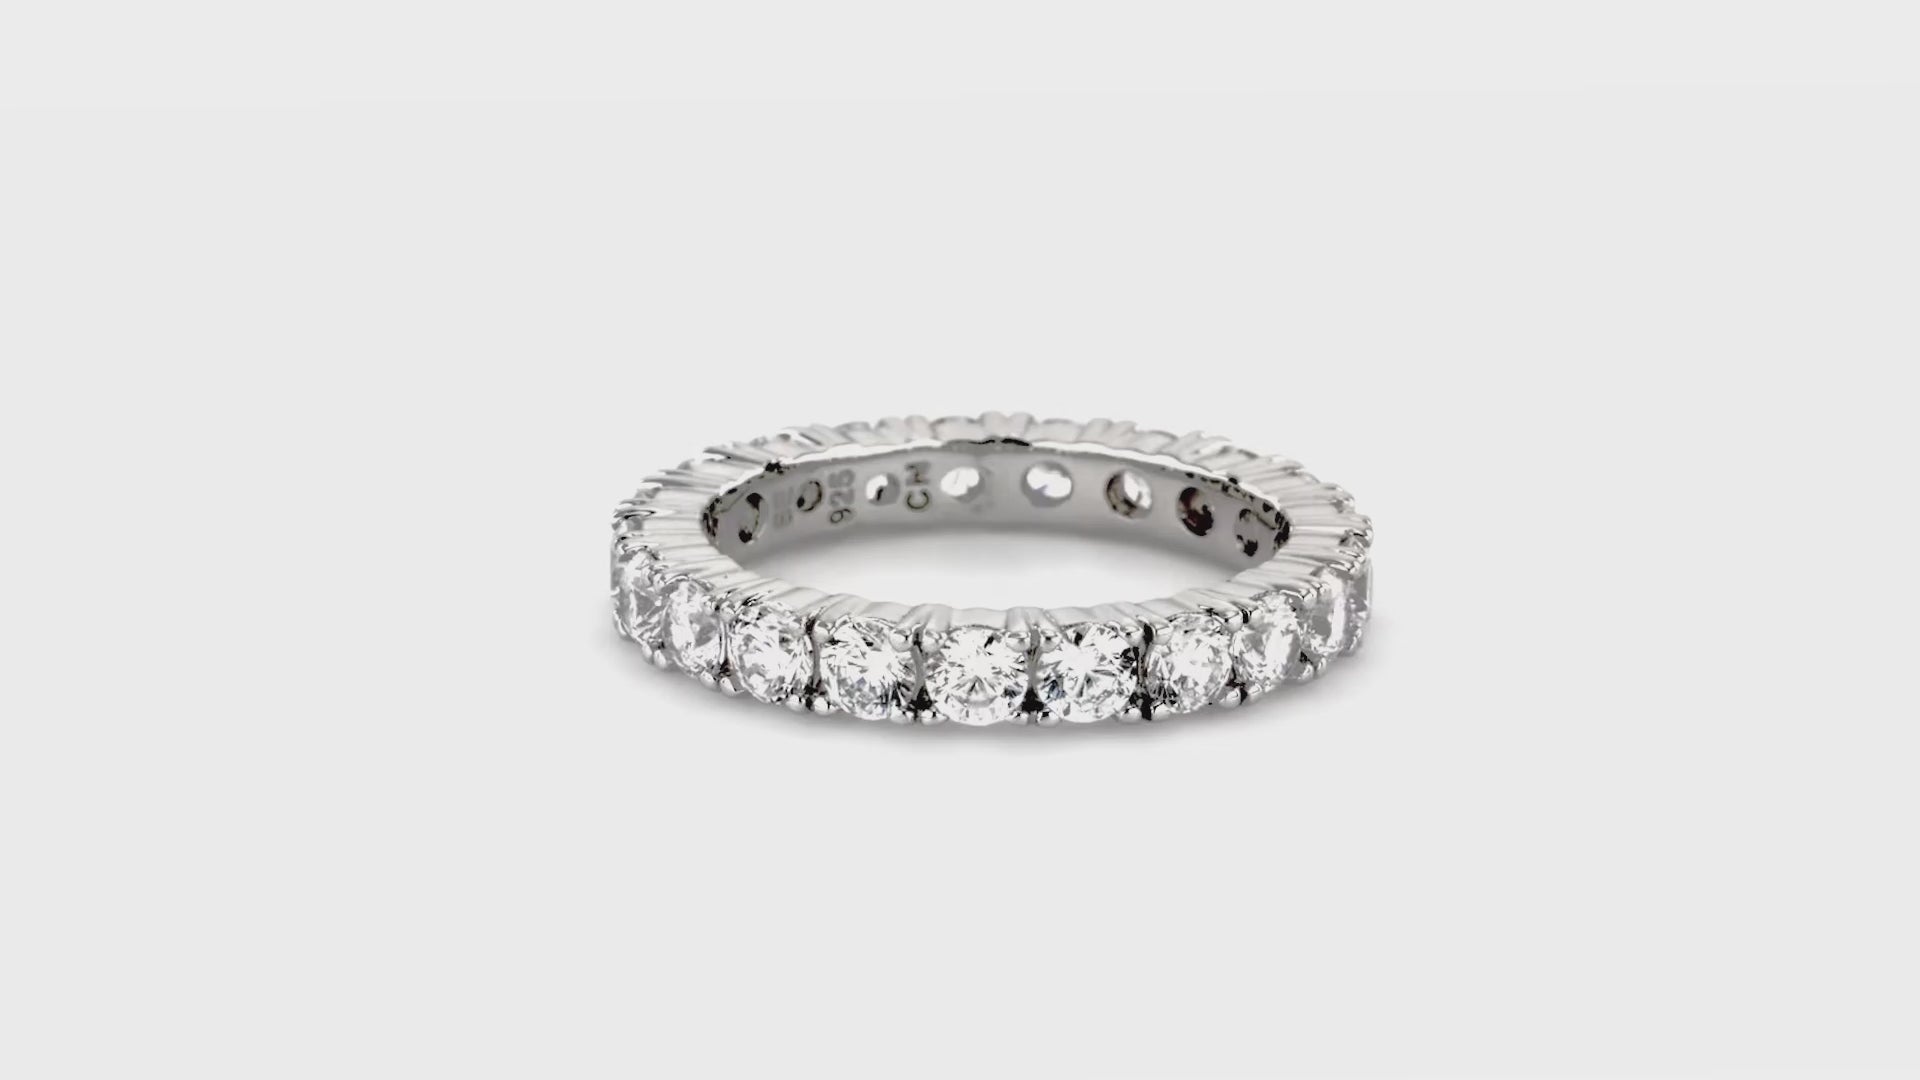 Video Contains CZ Stackable Ring Set in Sterling Silver. Style Number VR645-01